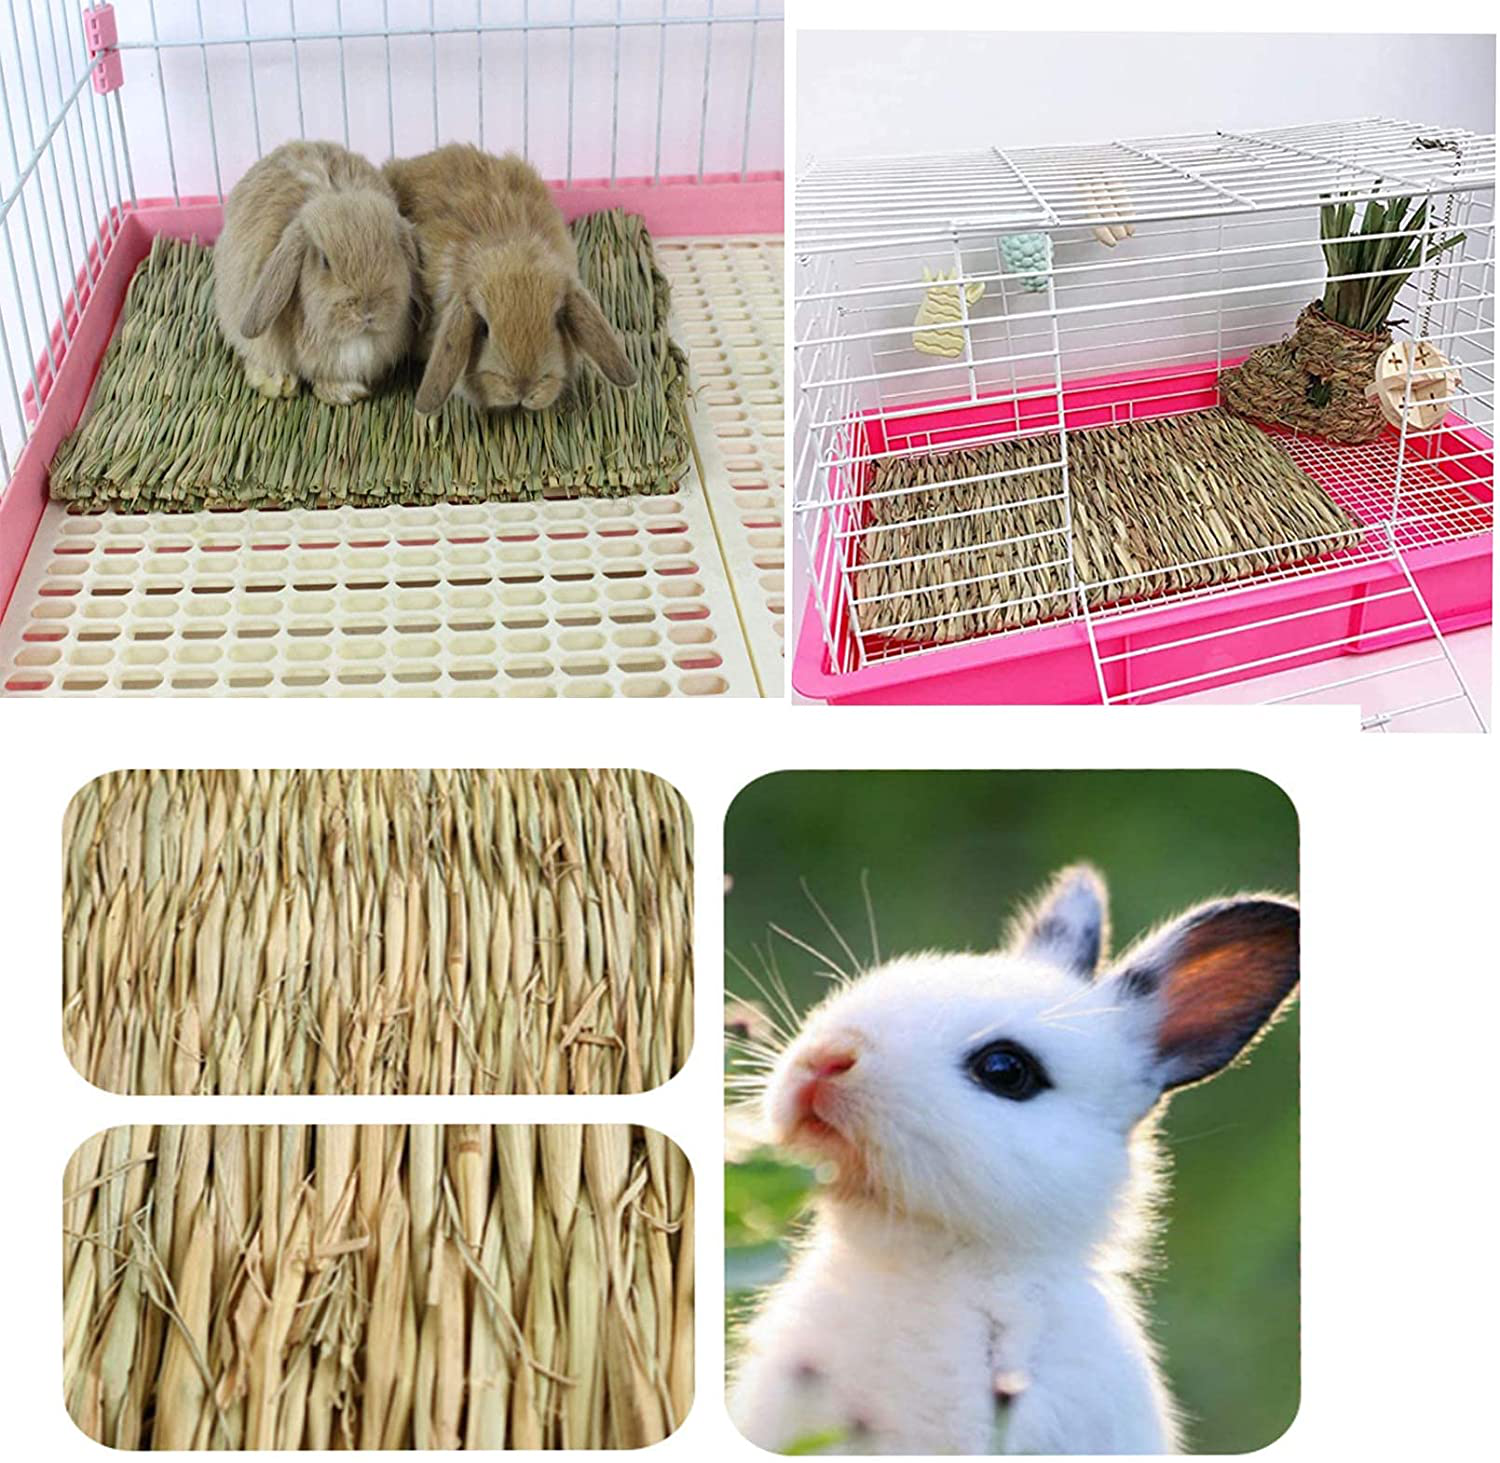 Hamiledyi Bunny Grass Mat Natural Woven Hamster Grass Bed Nest Small Animal Handmade Bedding Hay Mat Chewing Play Toy for Guinea Pig Chinchilla Rabbit Squirrel Hedgehog(6 Pack)